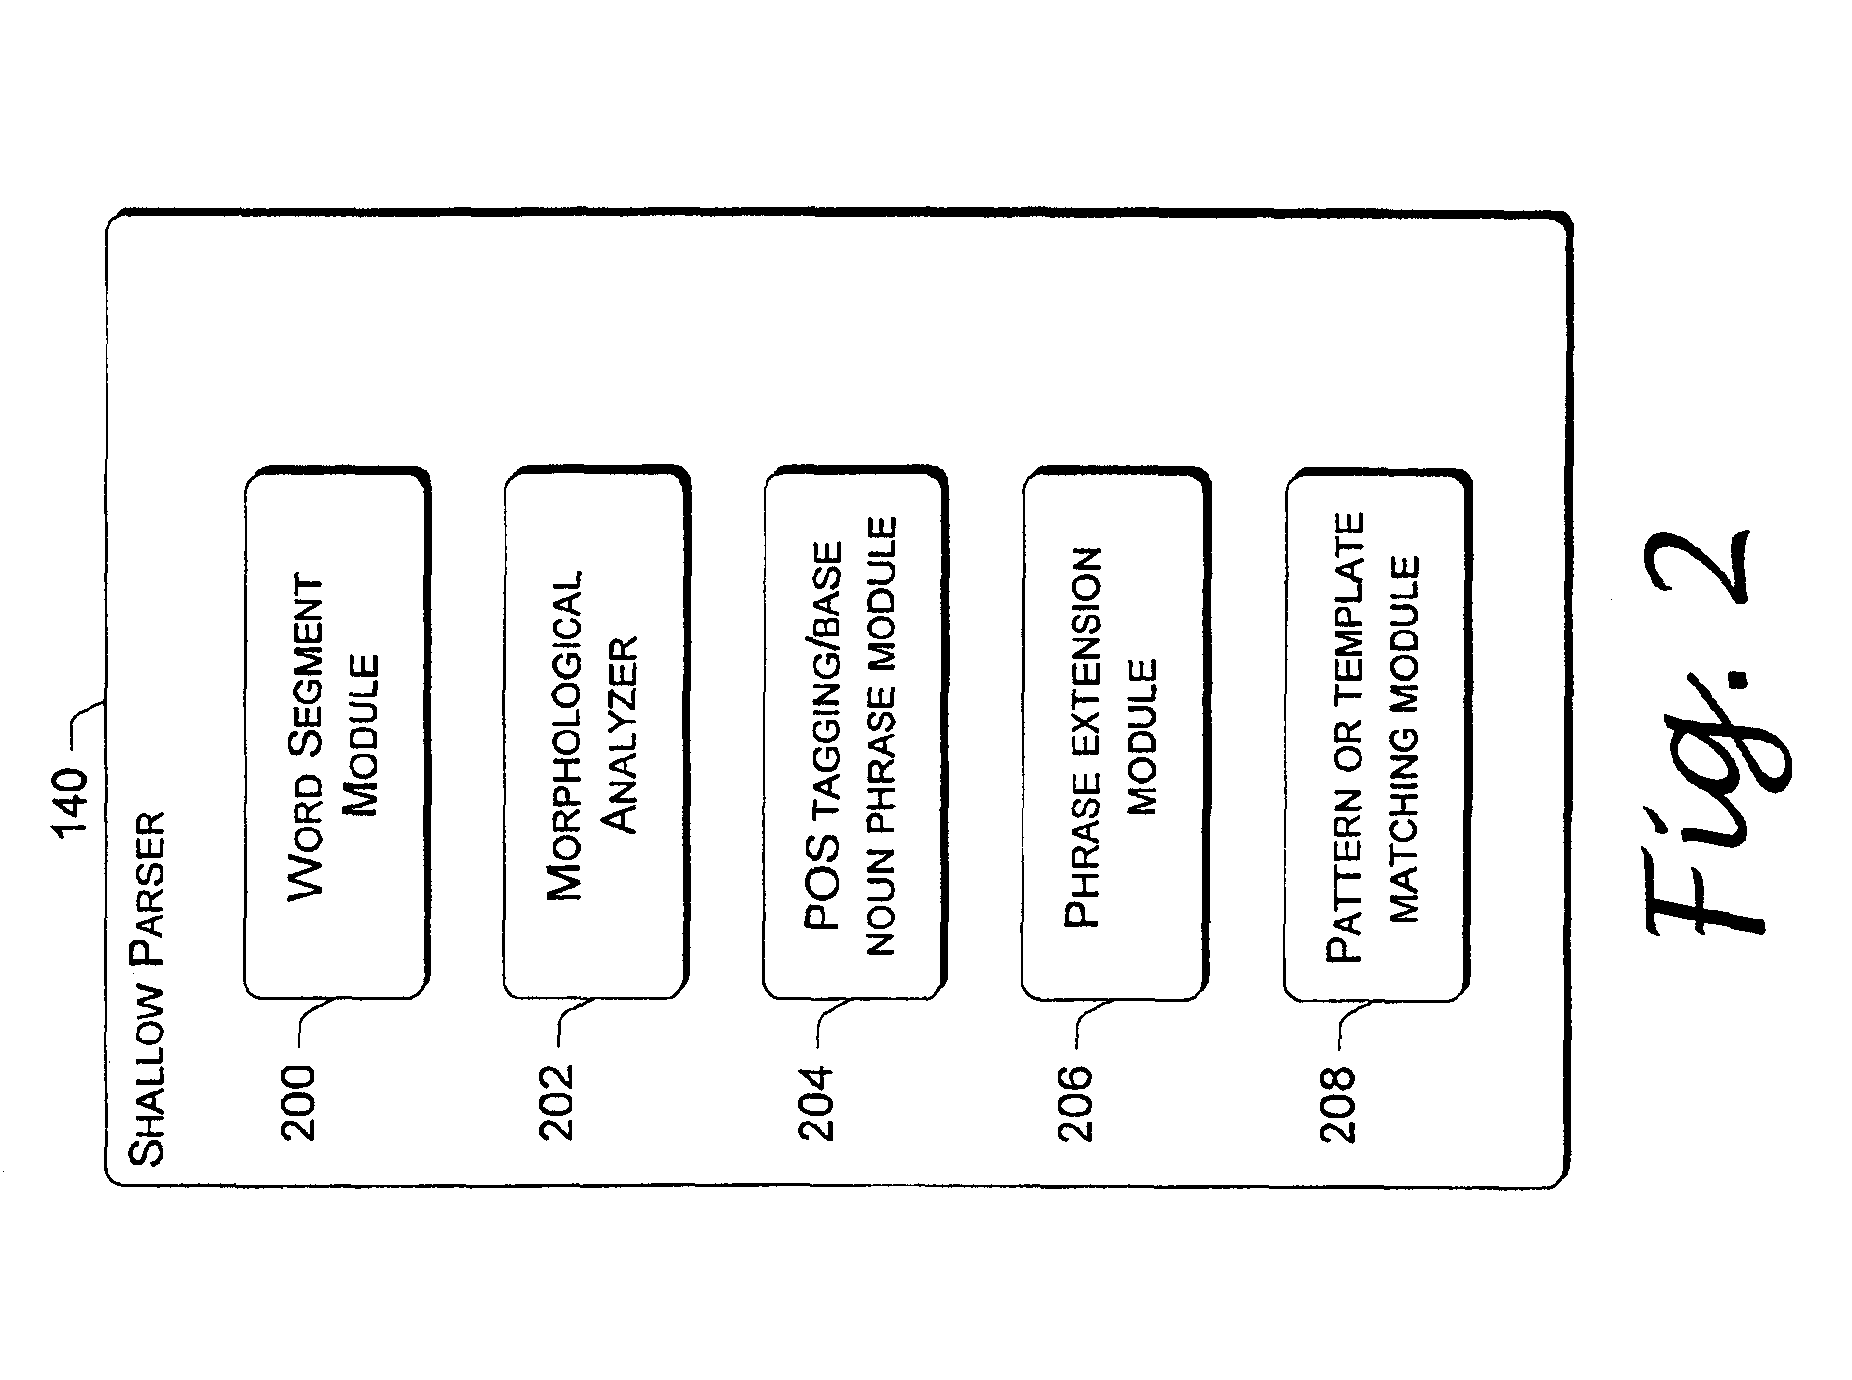 System and method for identifying base noun phrases